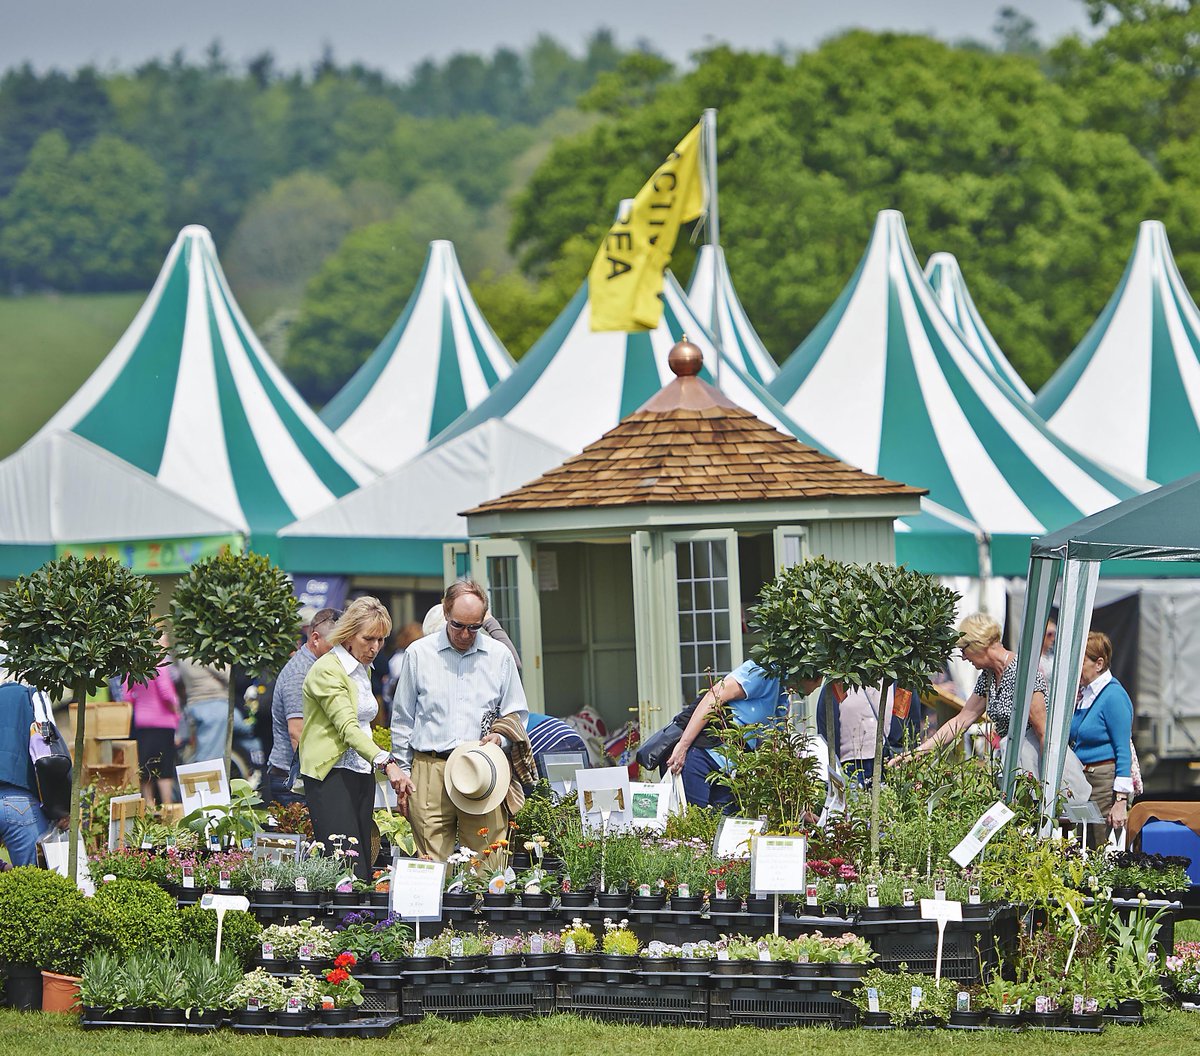 The Weald of Kent Craft Show is this #BankHolidayWeekend in the Penshurst Place Parkland. Tickets available in advance or on the door thecraftshows.co.uk/wealdofkent202…